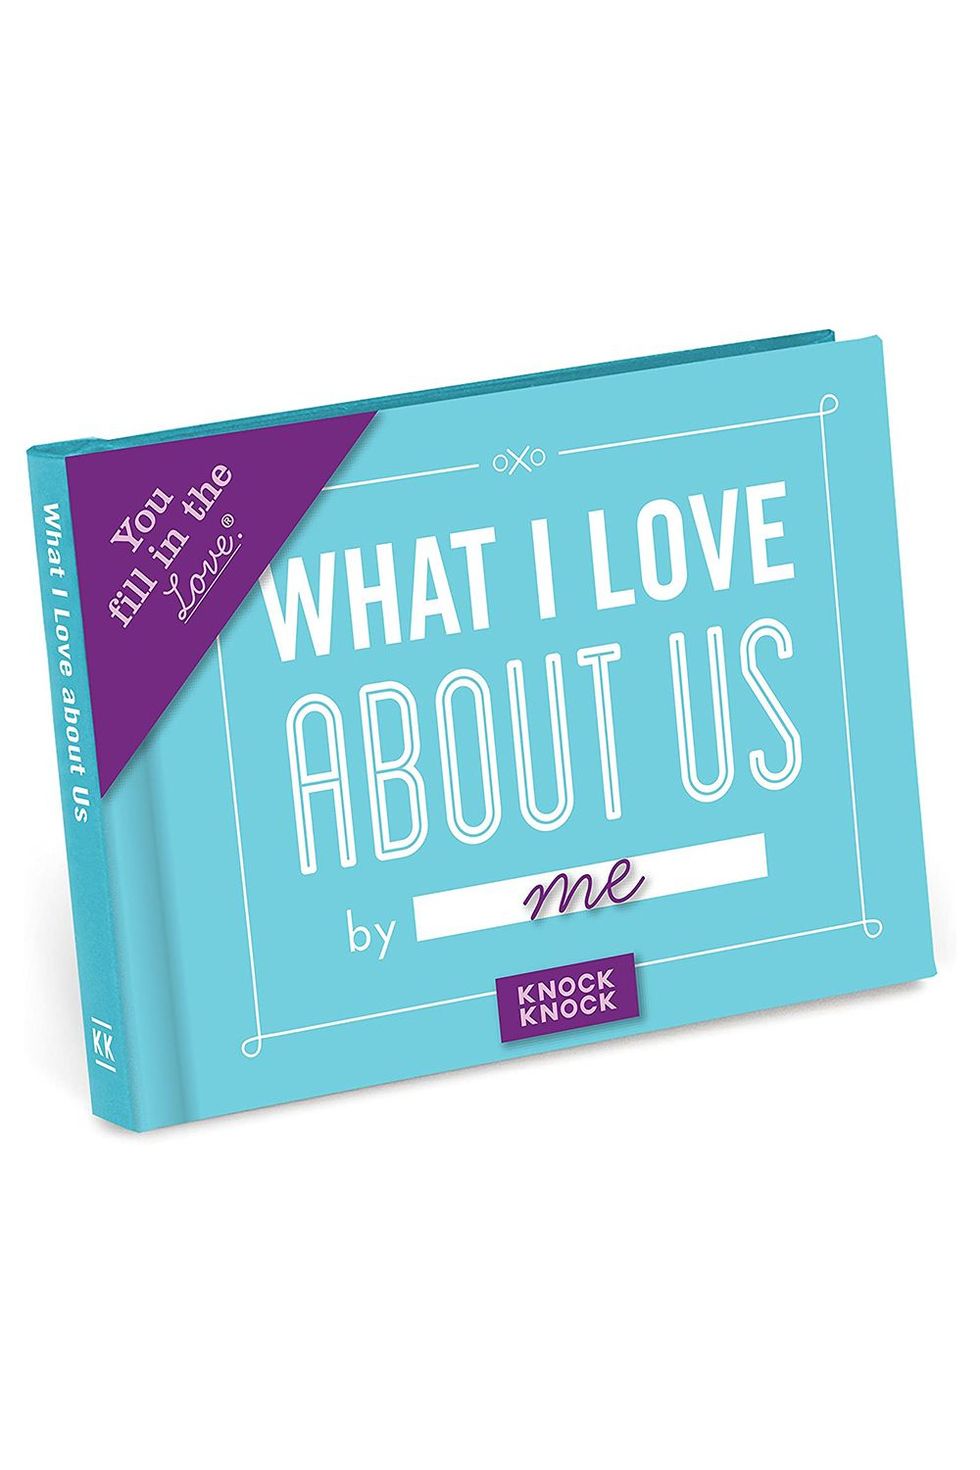 What I Love About Us Fill-in-the-Blank Gift Journal